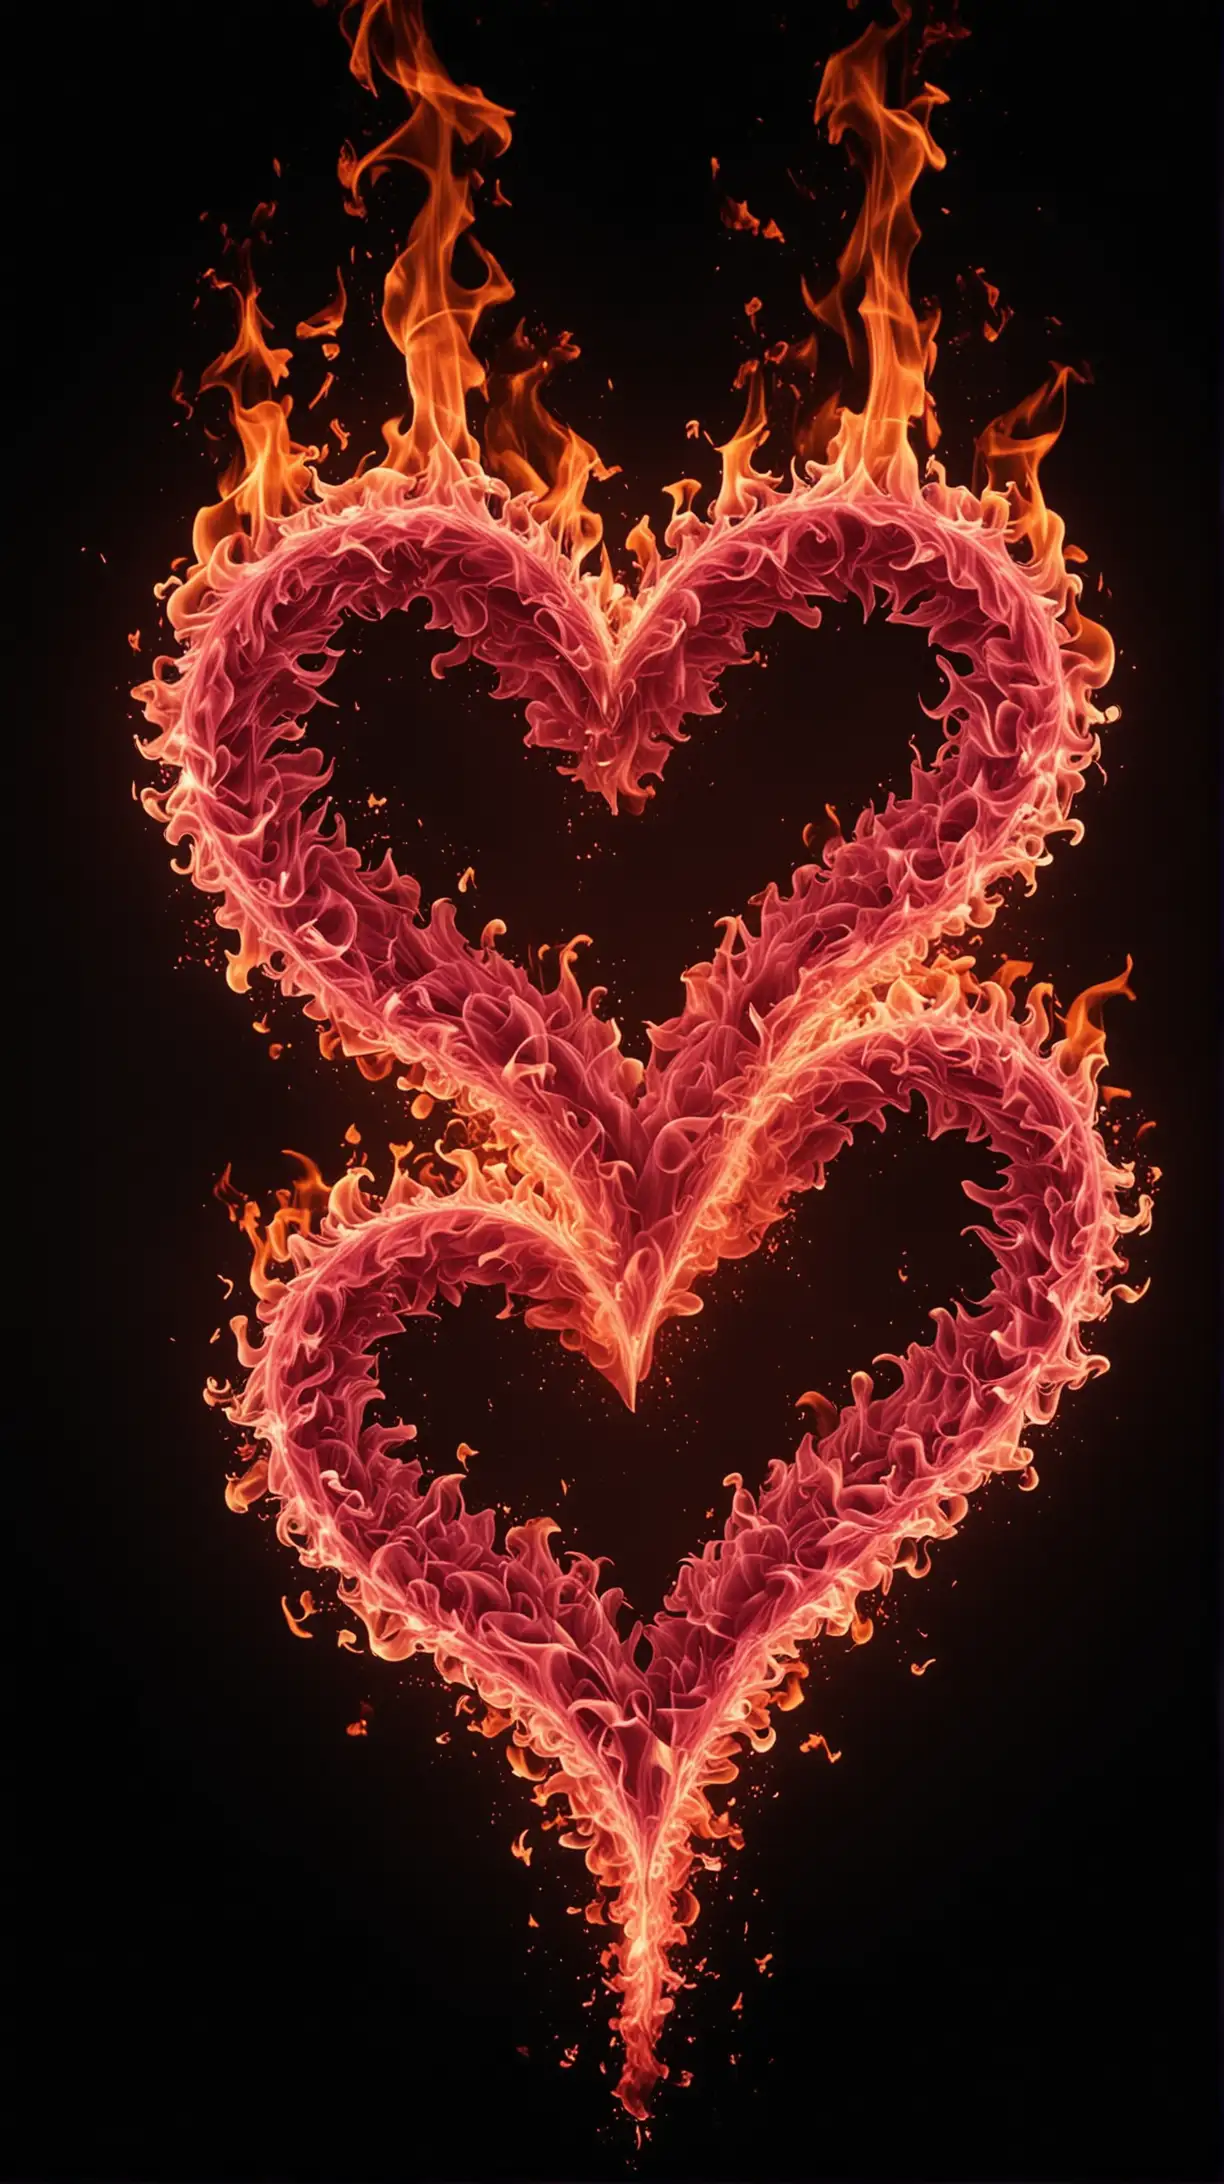 Romantic Pink Flames Creating Heart Shapes Against Dark Background